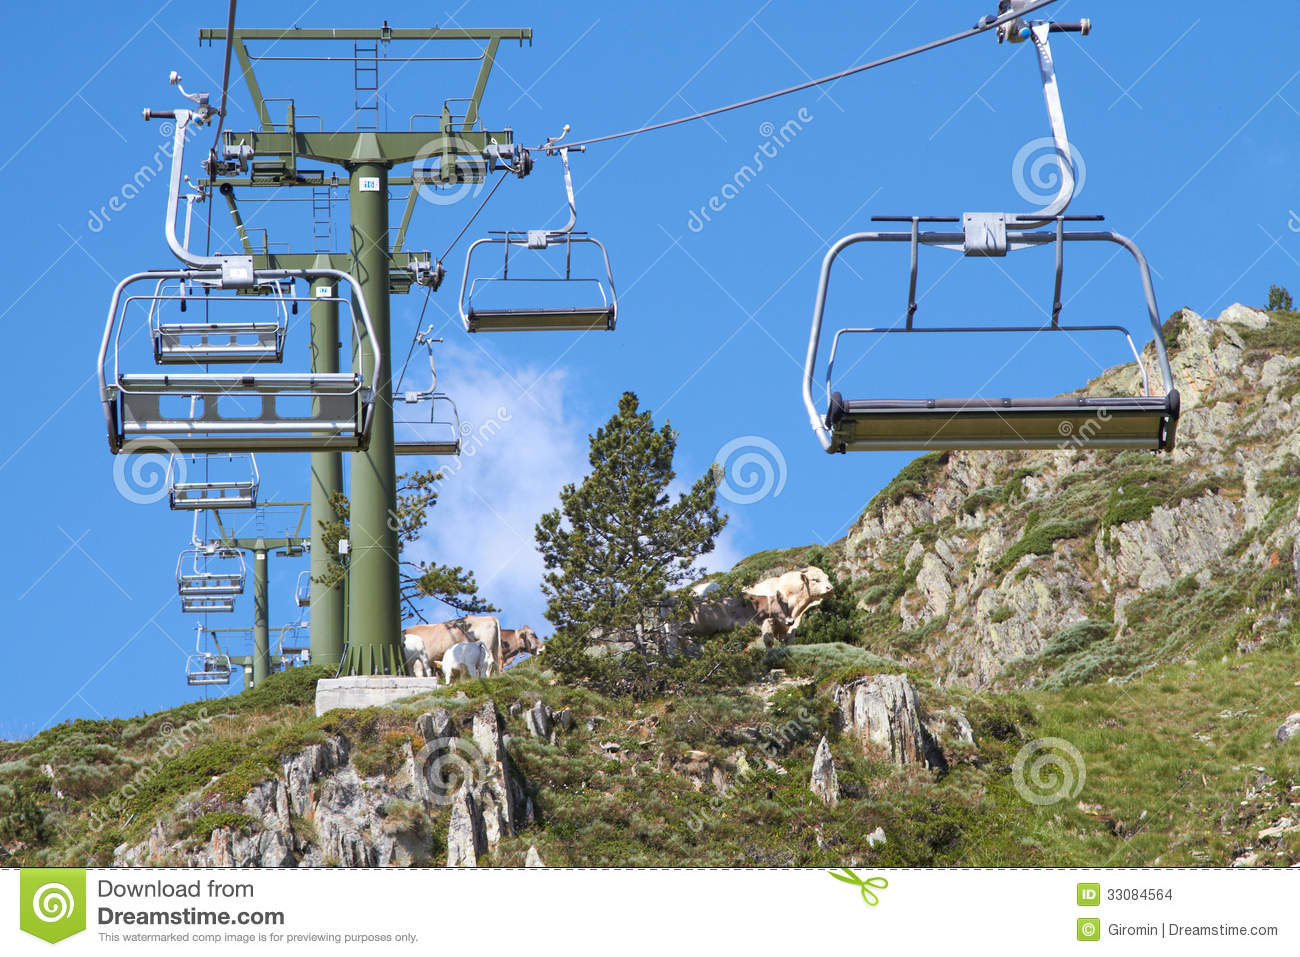 Chair Lift In Summer Landscape Stock Images   Image  33084564